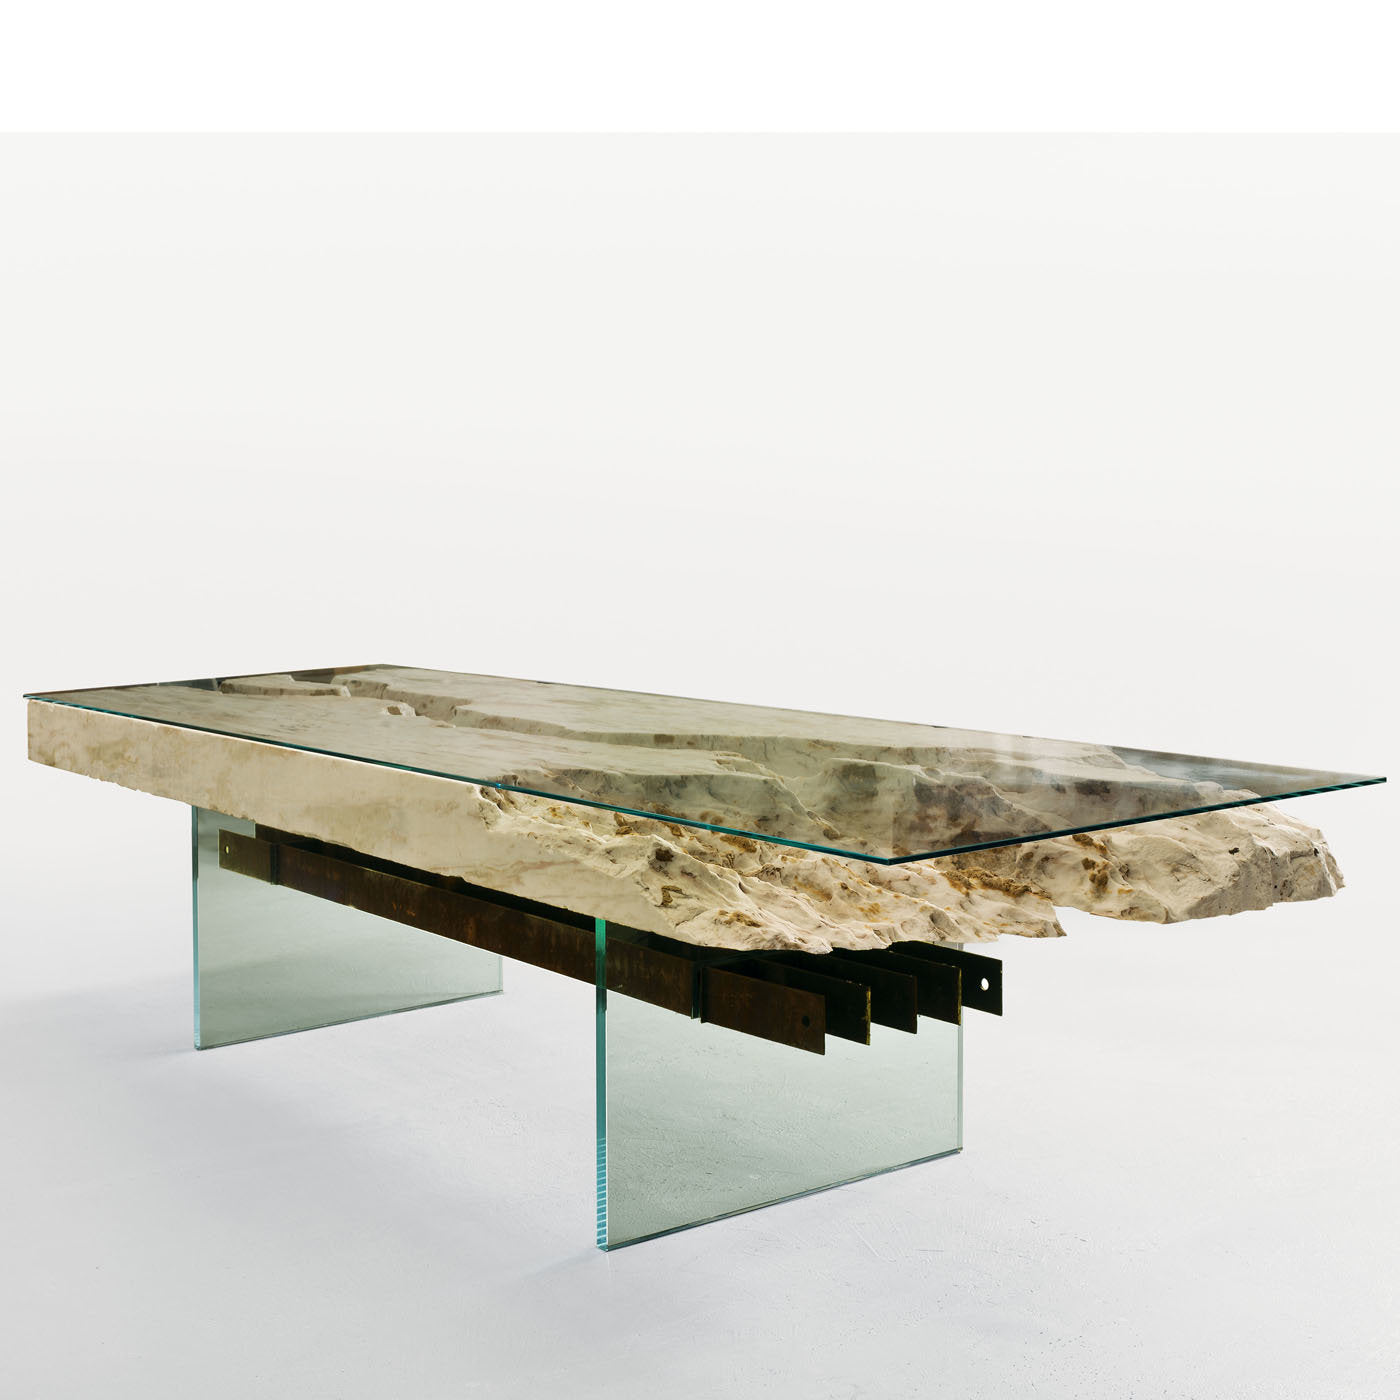 Natura Dining Table by Wind and Water - Alternative view 1